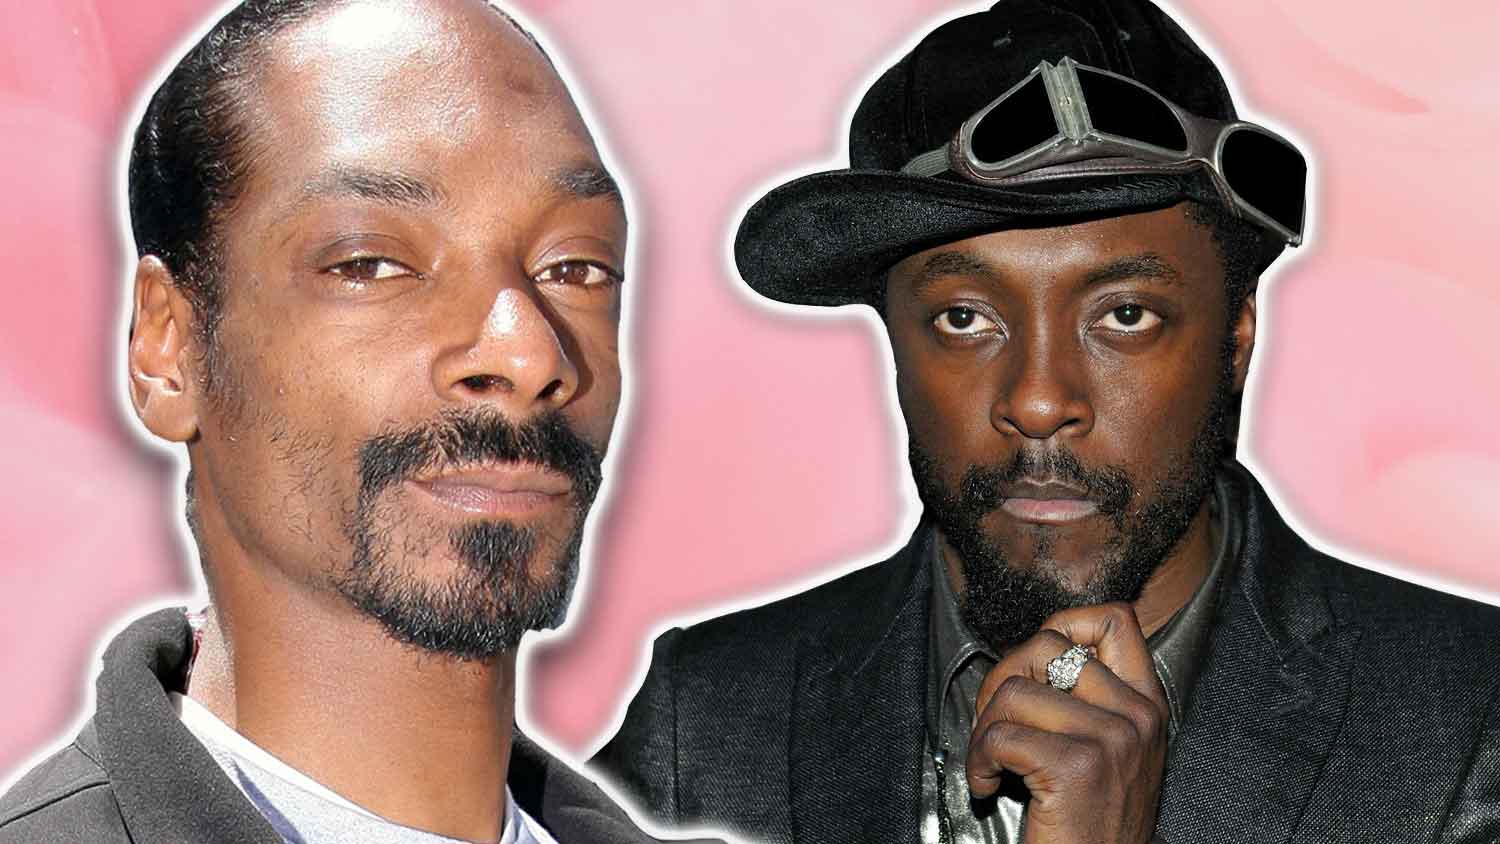 Snoop Dogg and Will.i.am Want You to ‘Be Nice’